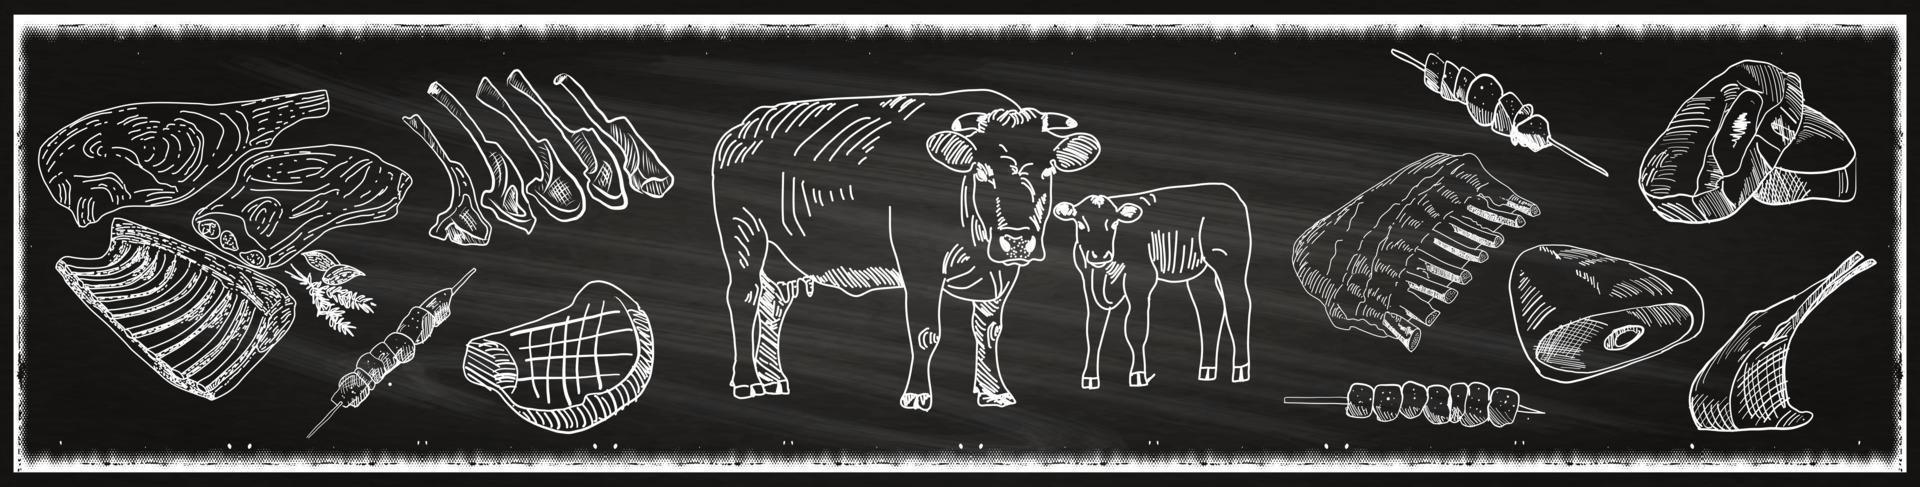 Butcher shop blackboard banner with cows and meat vector